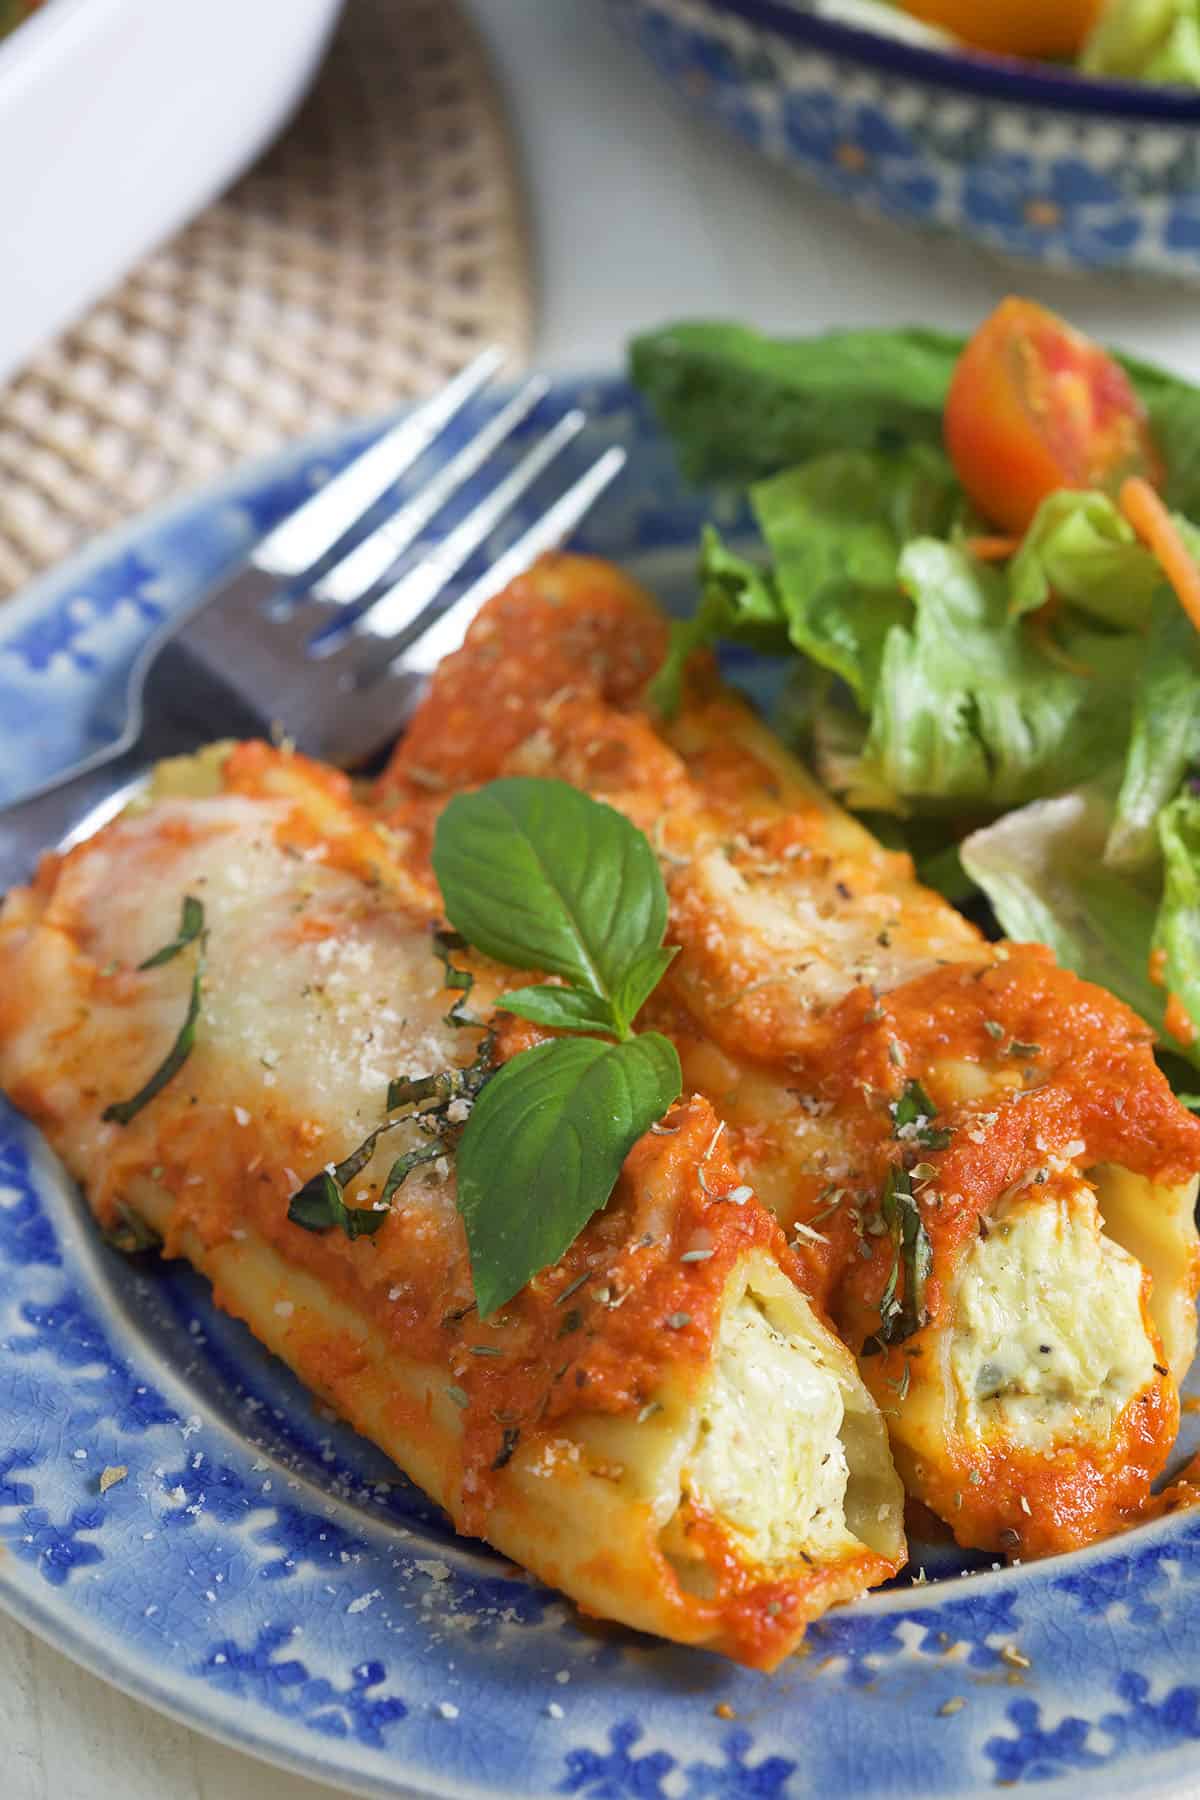 Two pieces of manicotti are placed on a plate next to a fork and side salad.